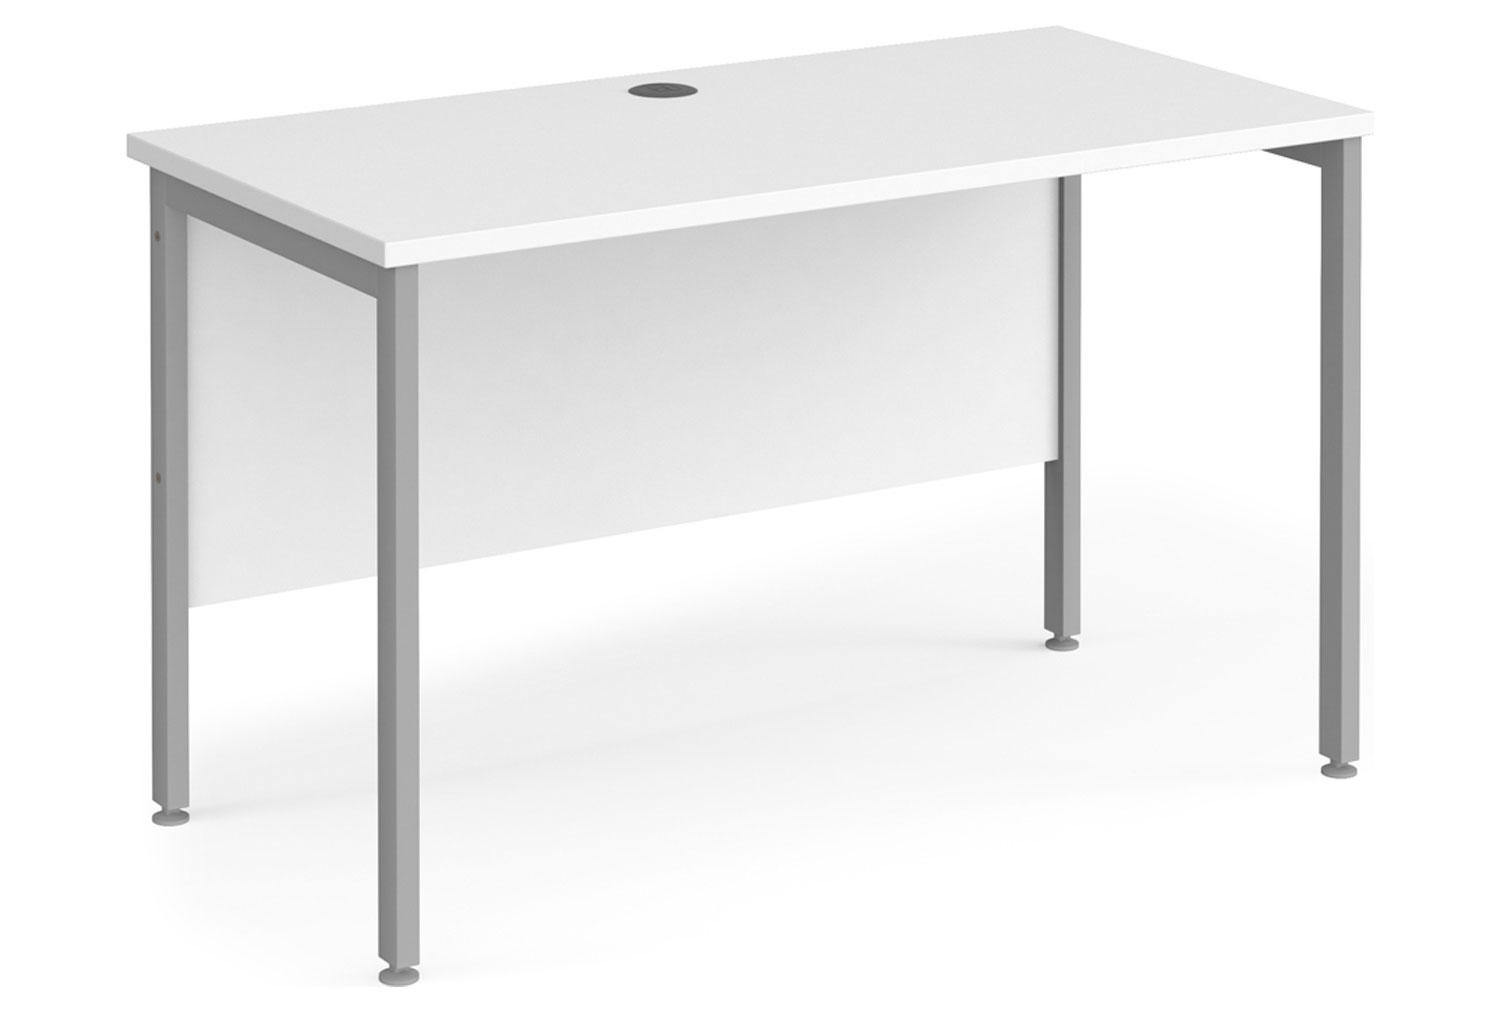 Value Line Deluxe H-Leg Narrow Rectangular Office Desk (Silver Legs), 120w60dx73h (cm), White, Express Delivery